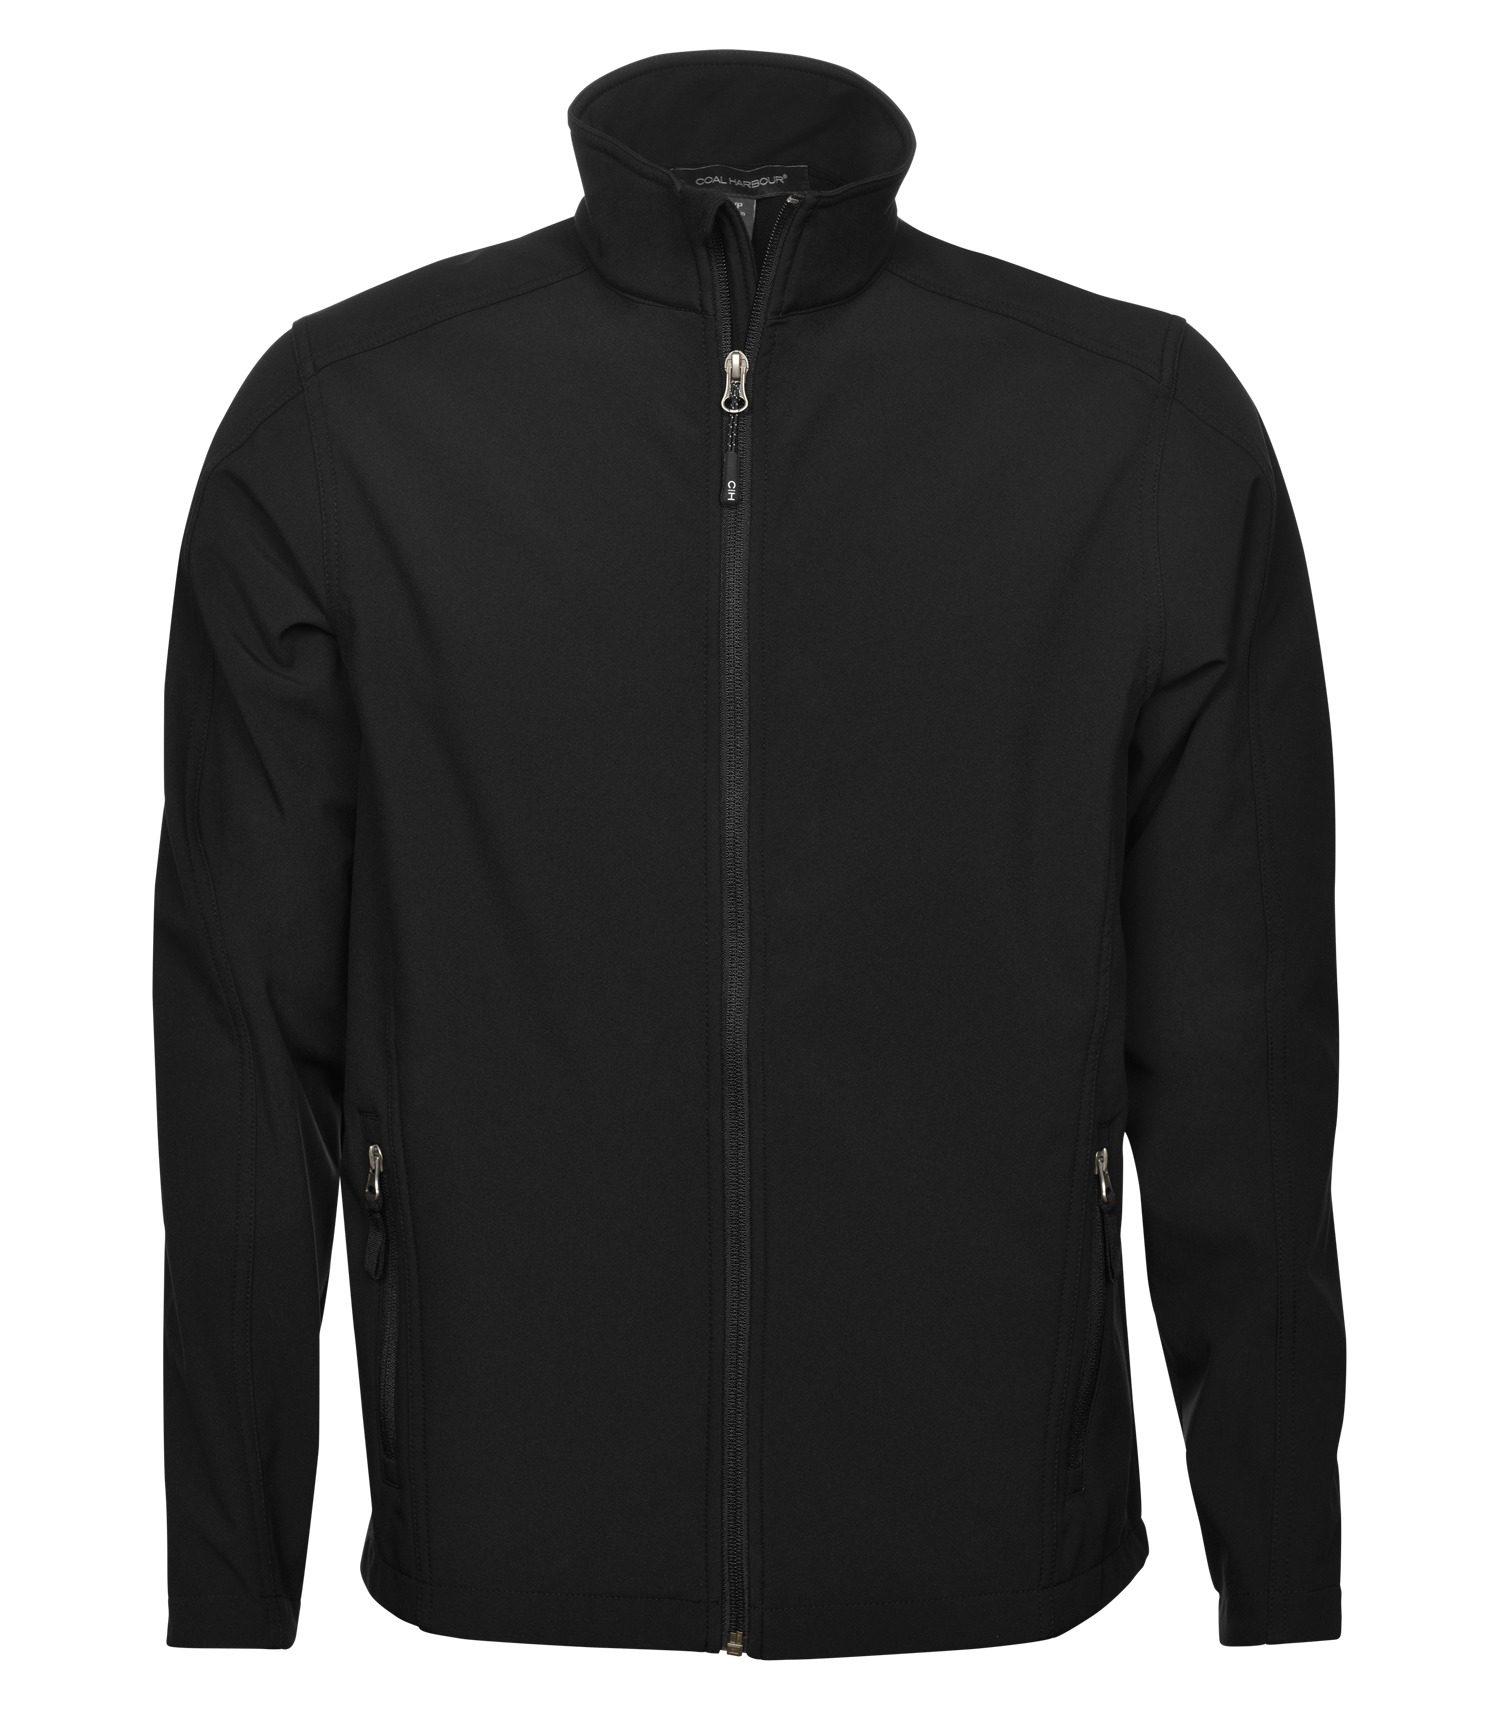 COAL HARBOUR EVERYDAY WATER REPELLENT SOFT SHELL JACKET #J7603 Black